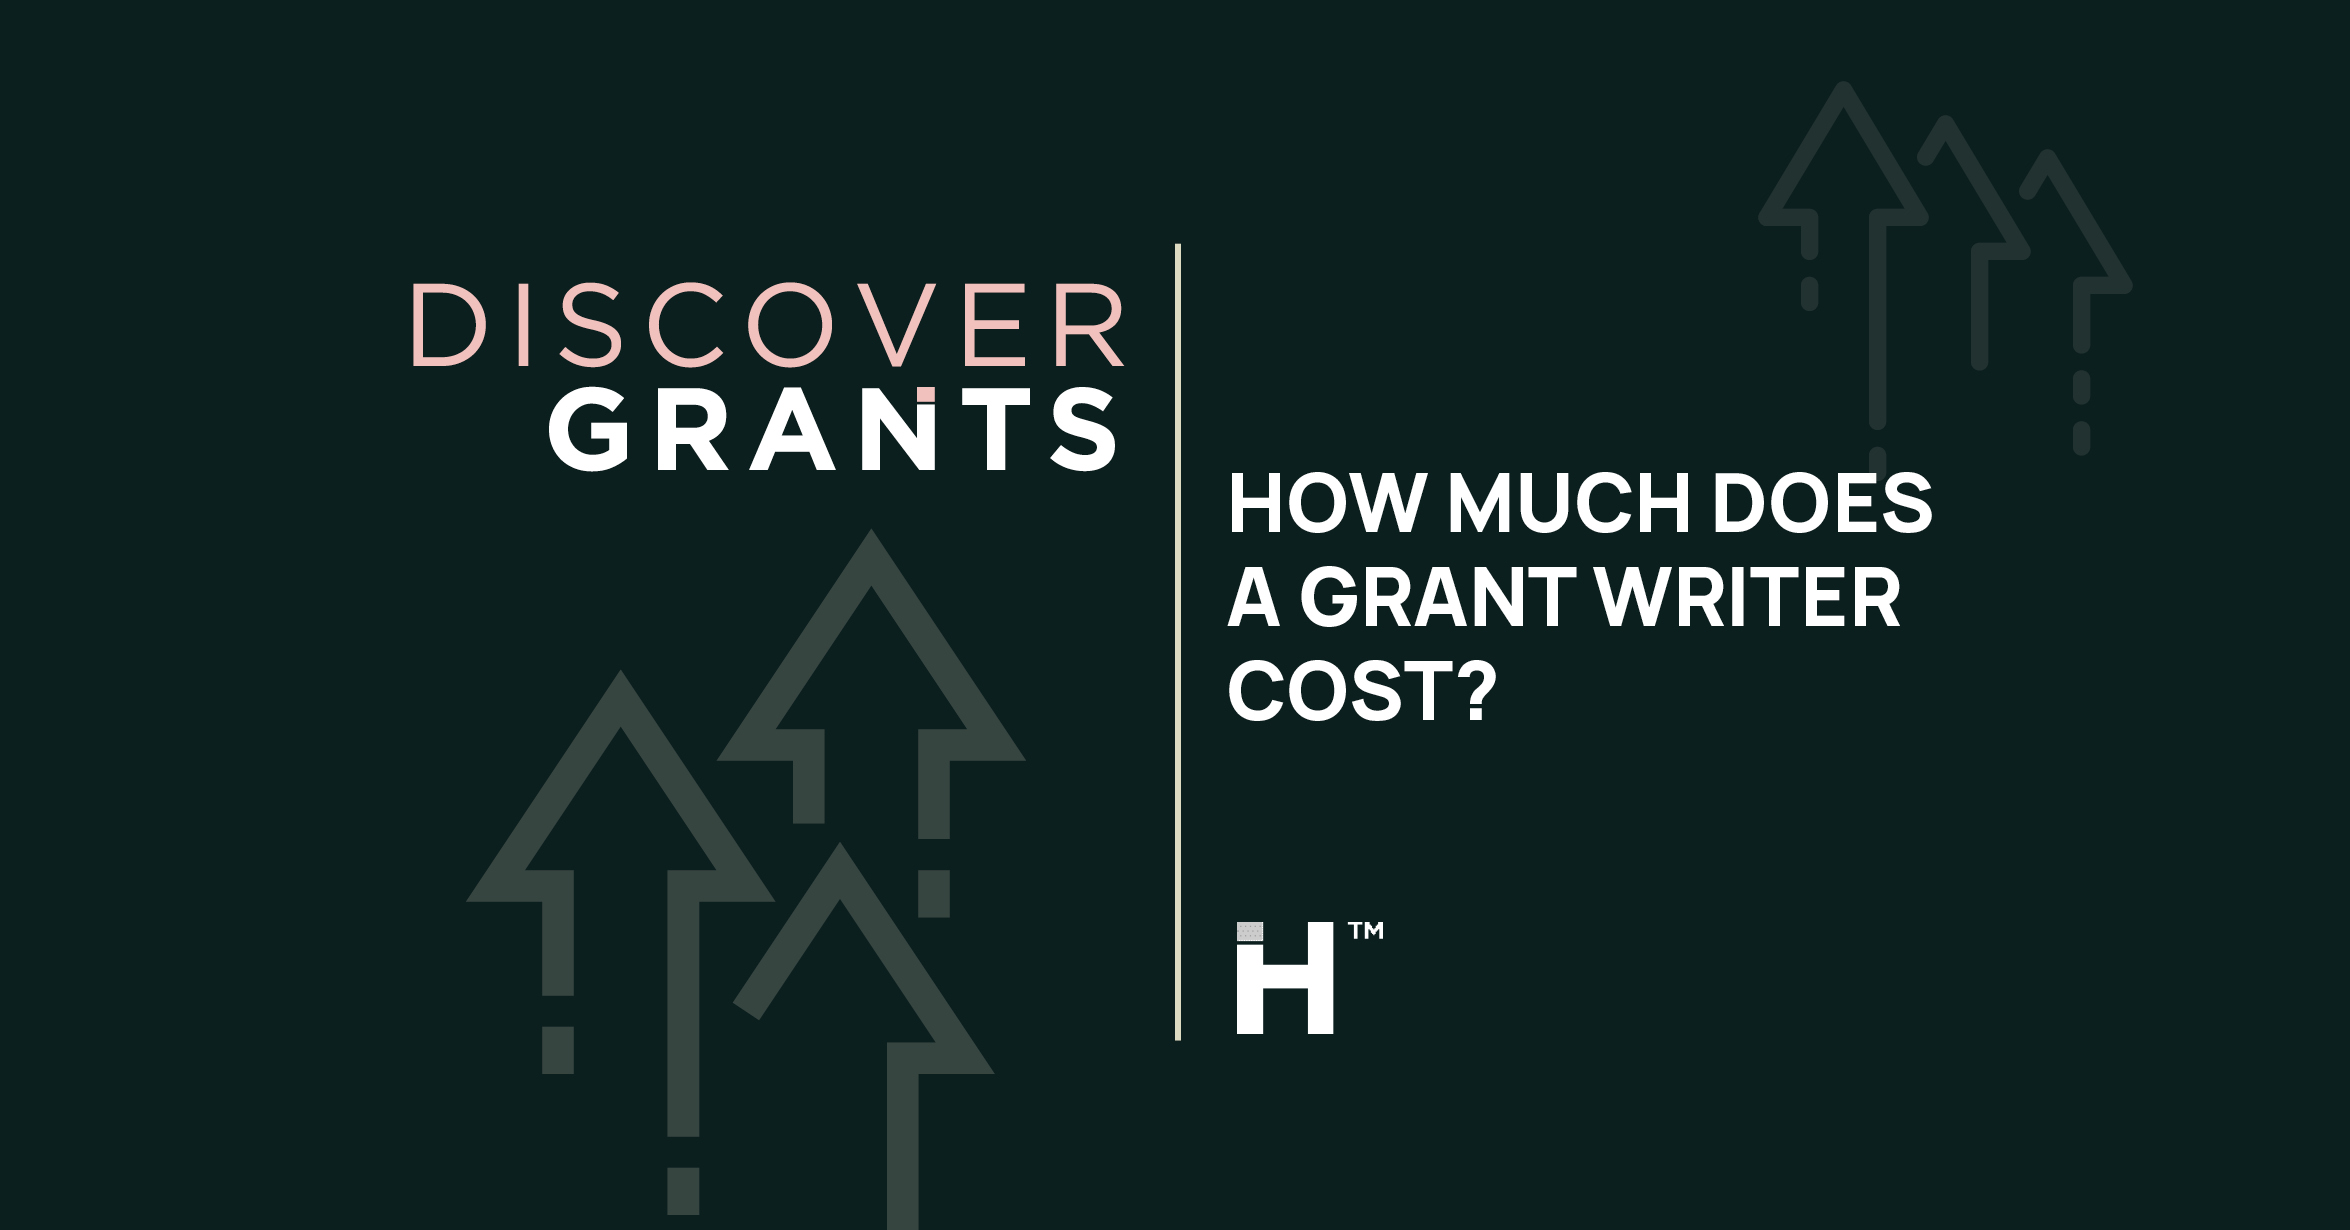 What Does a Grant Writer Cost?